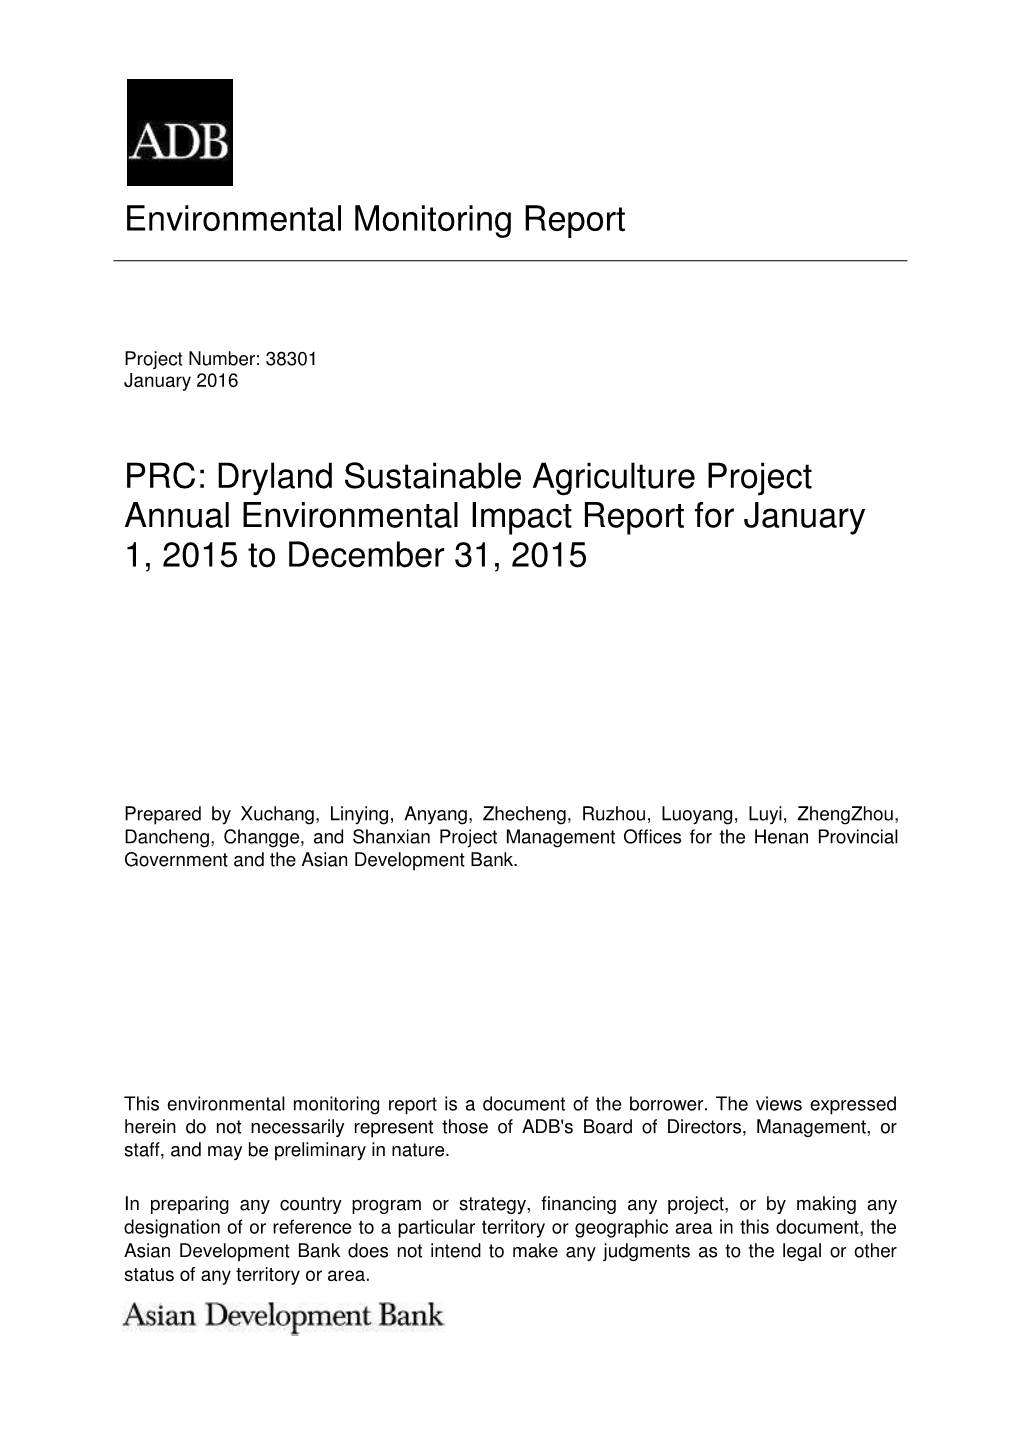 Dryland Sustainable Agriculture Project Annual Environmental Impact Report for January 1, 2015 to December 31, 2015